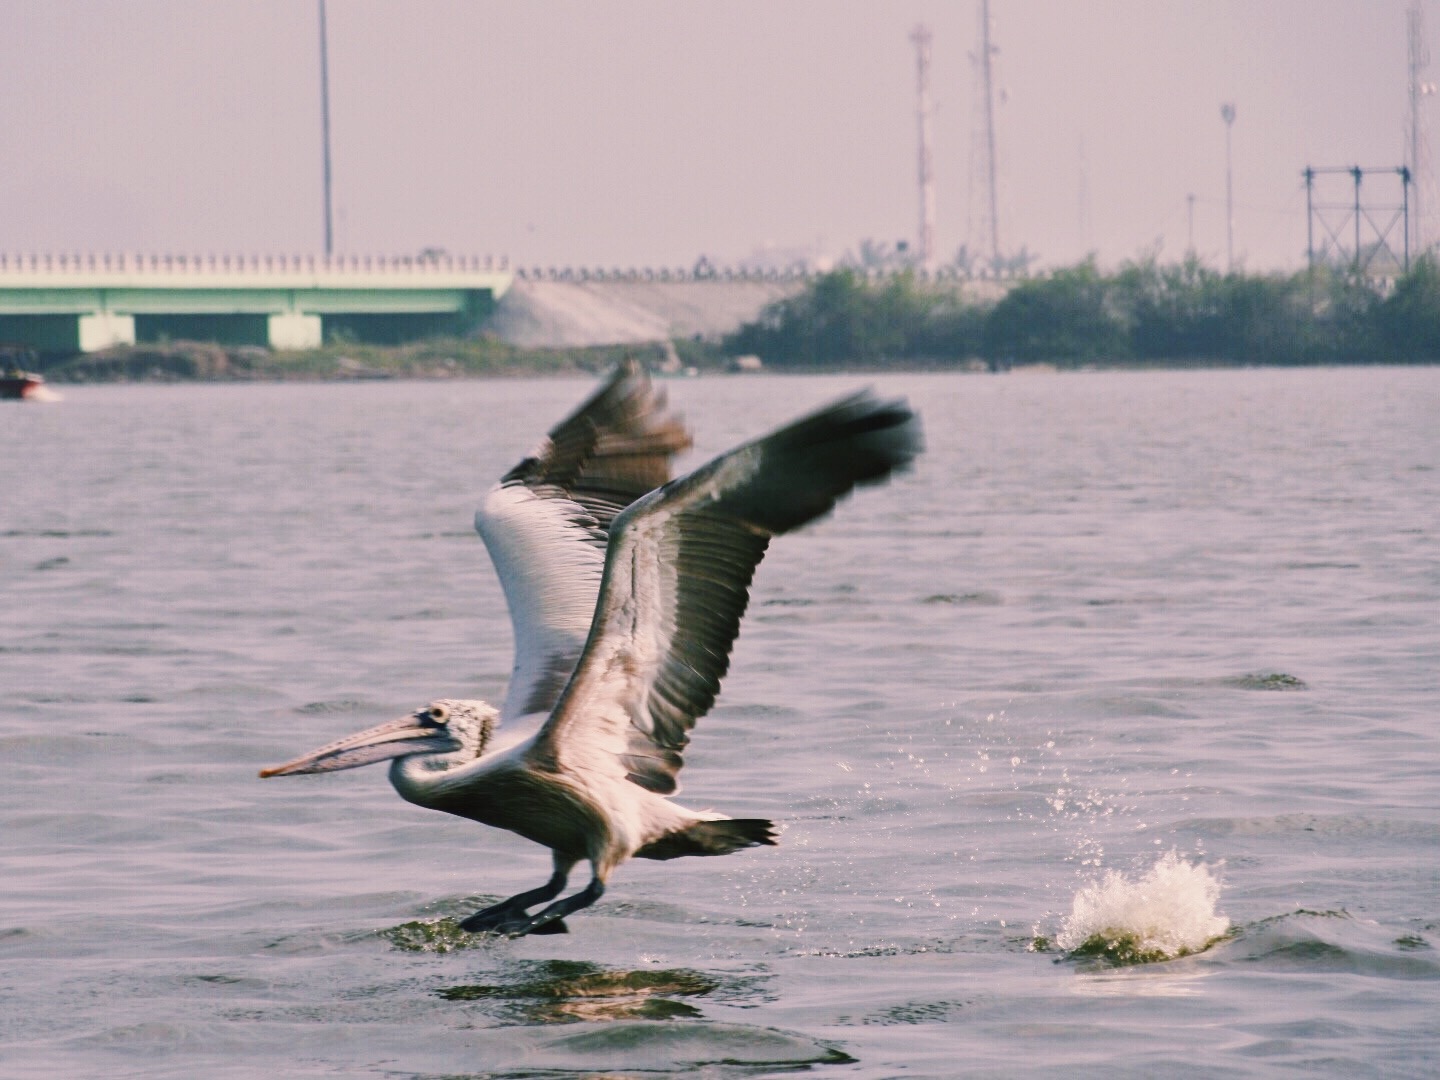 A pelican takes off